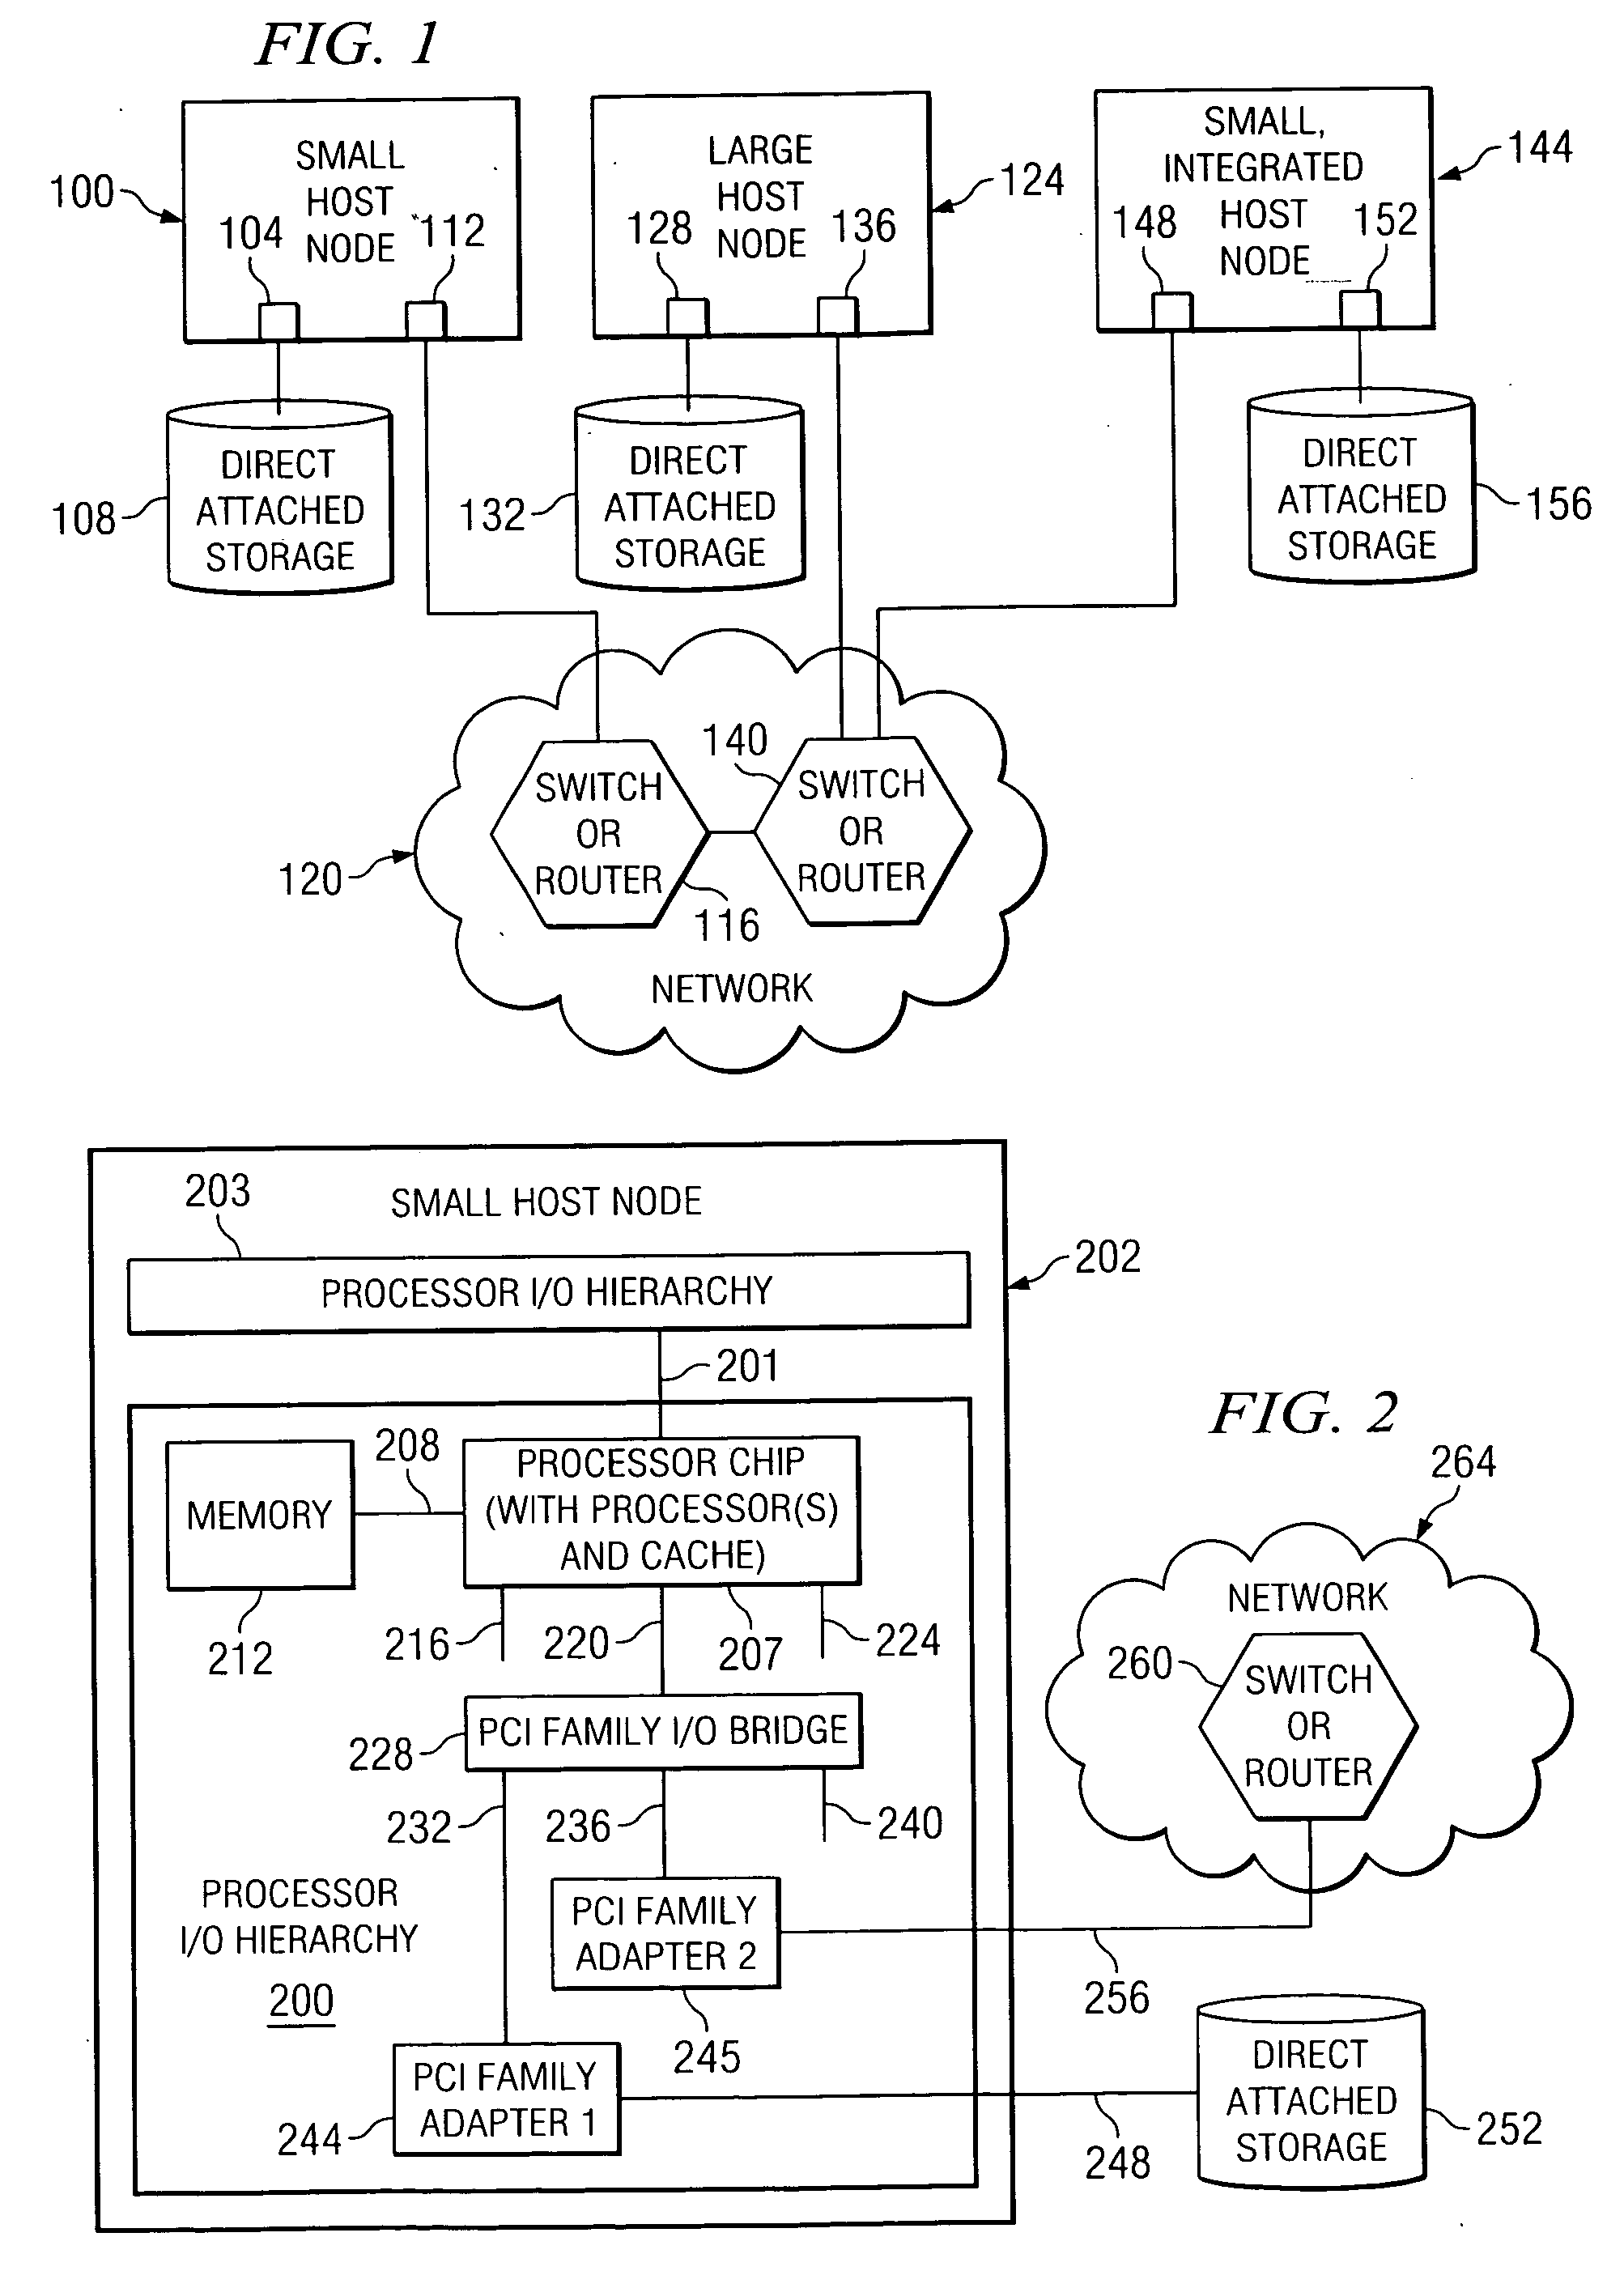 System and method for destroying virtual resources in a logically partitioned data processing system